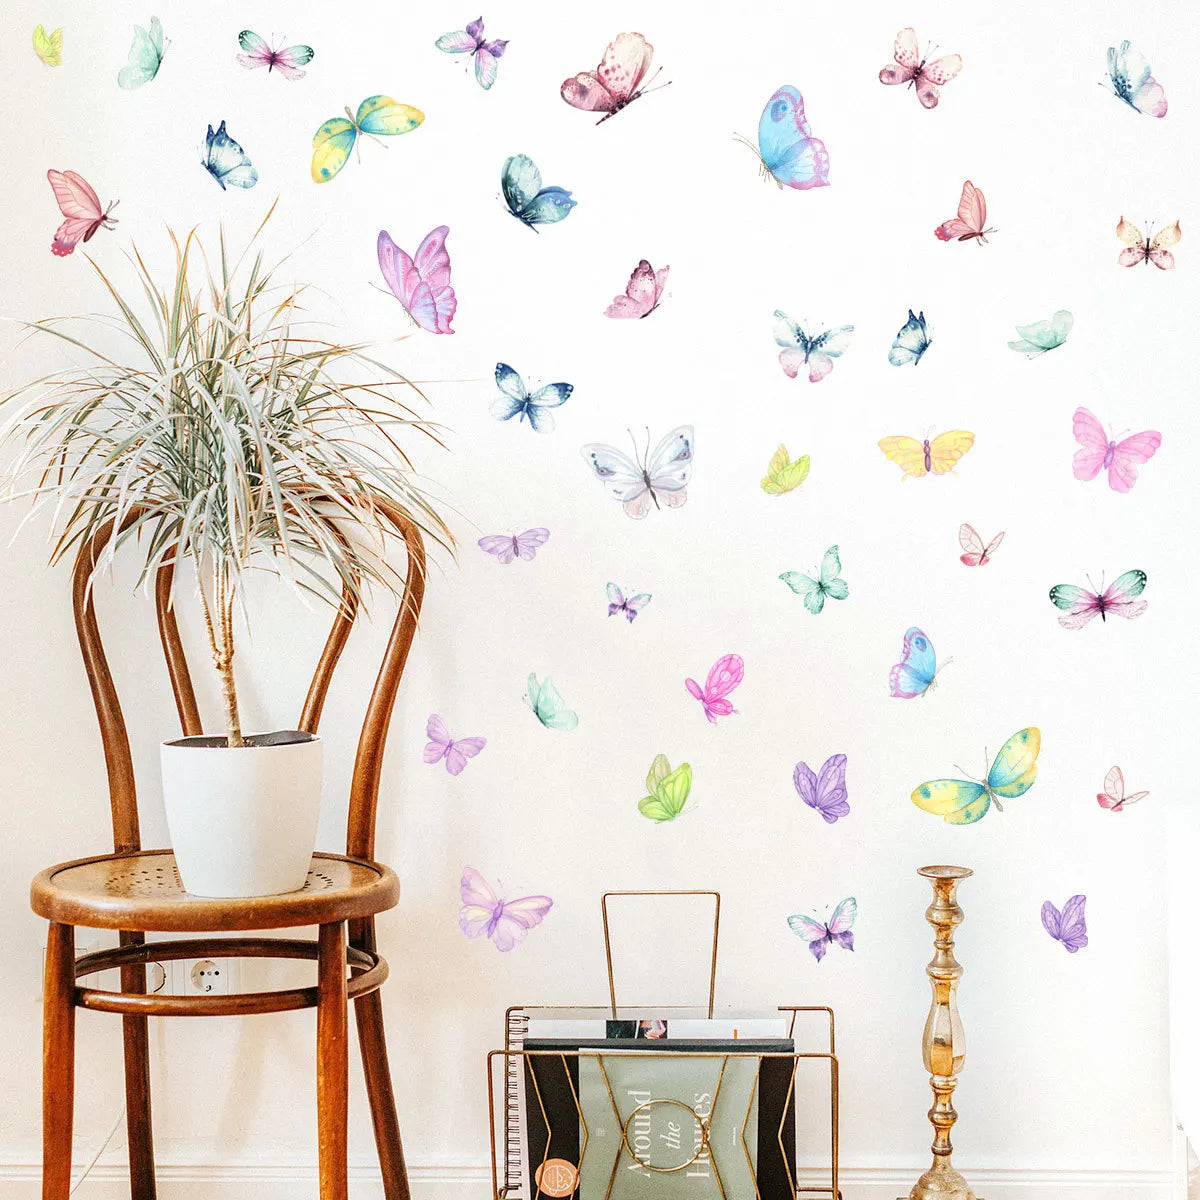 Butterfly Wall Stickers Decoration for Bedroom Living Room Self Adhesive Wall Decals Girls Room Aesthetic PVC Mural Stickers